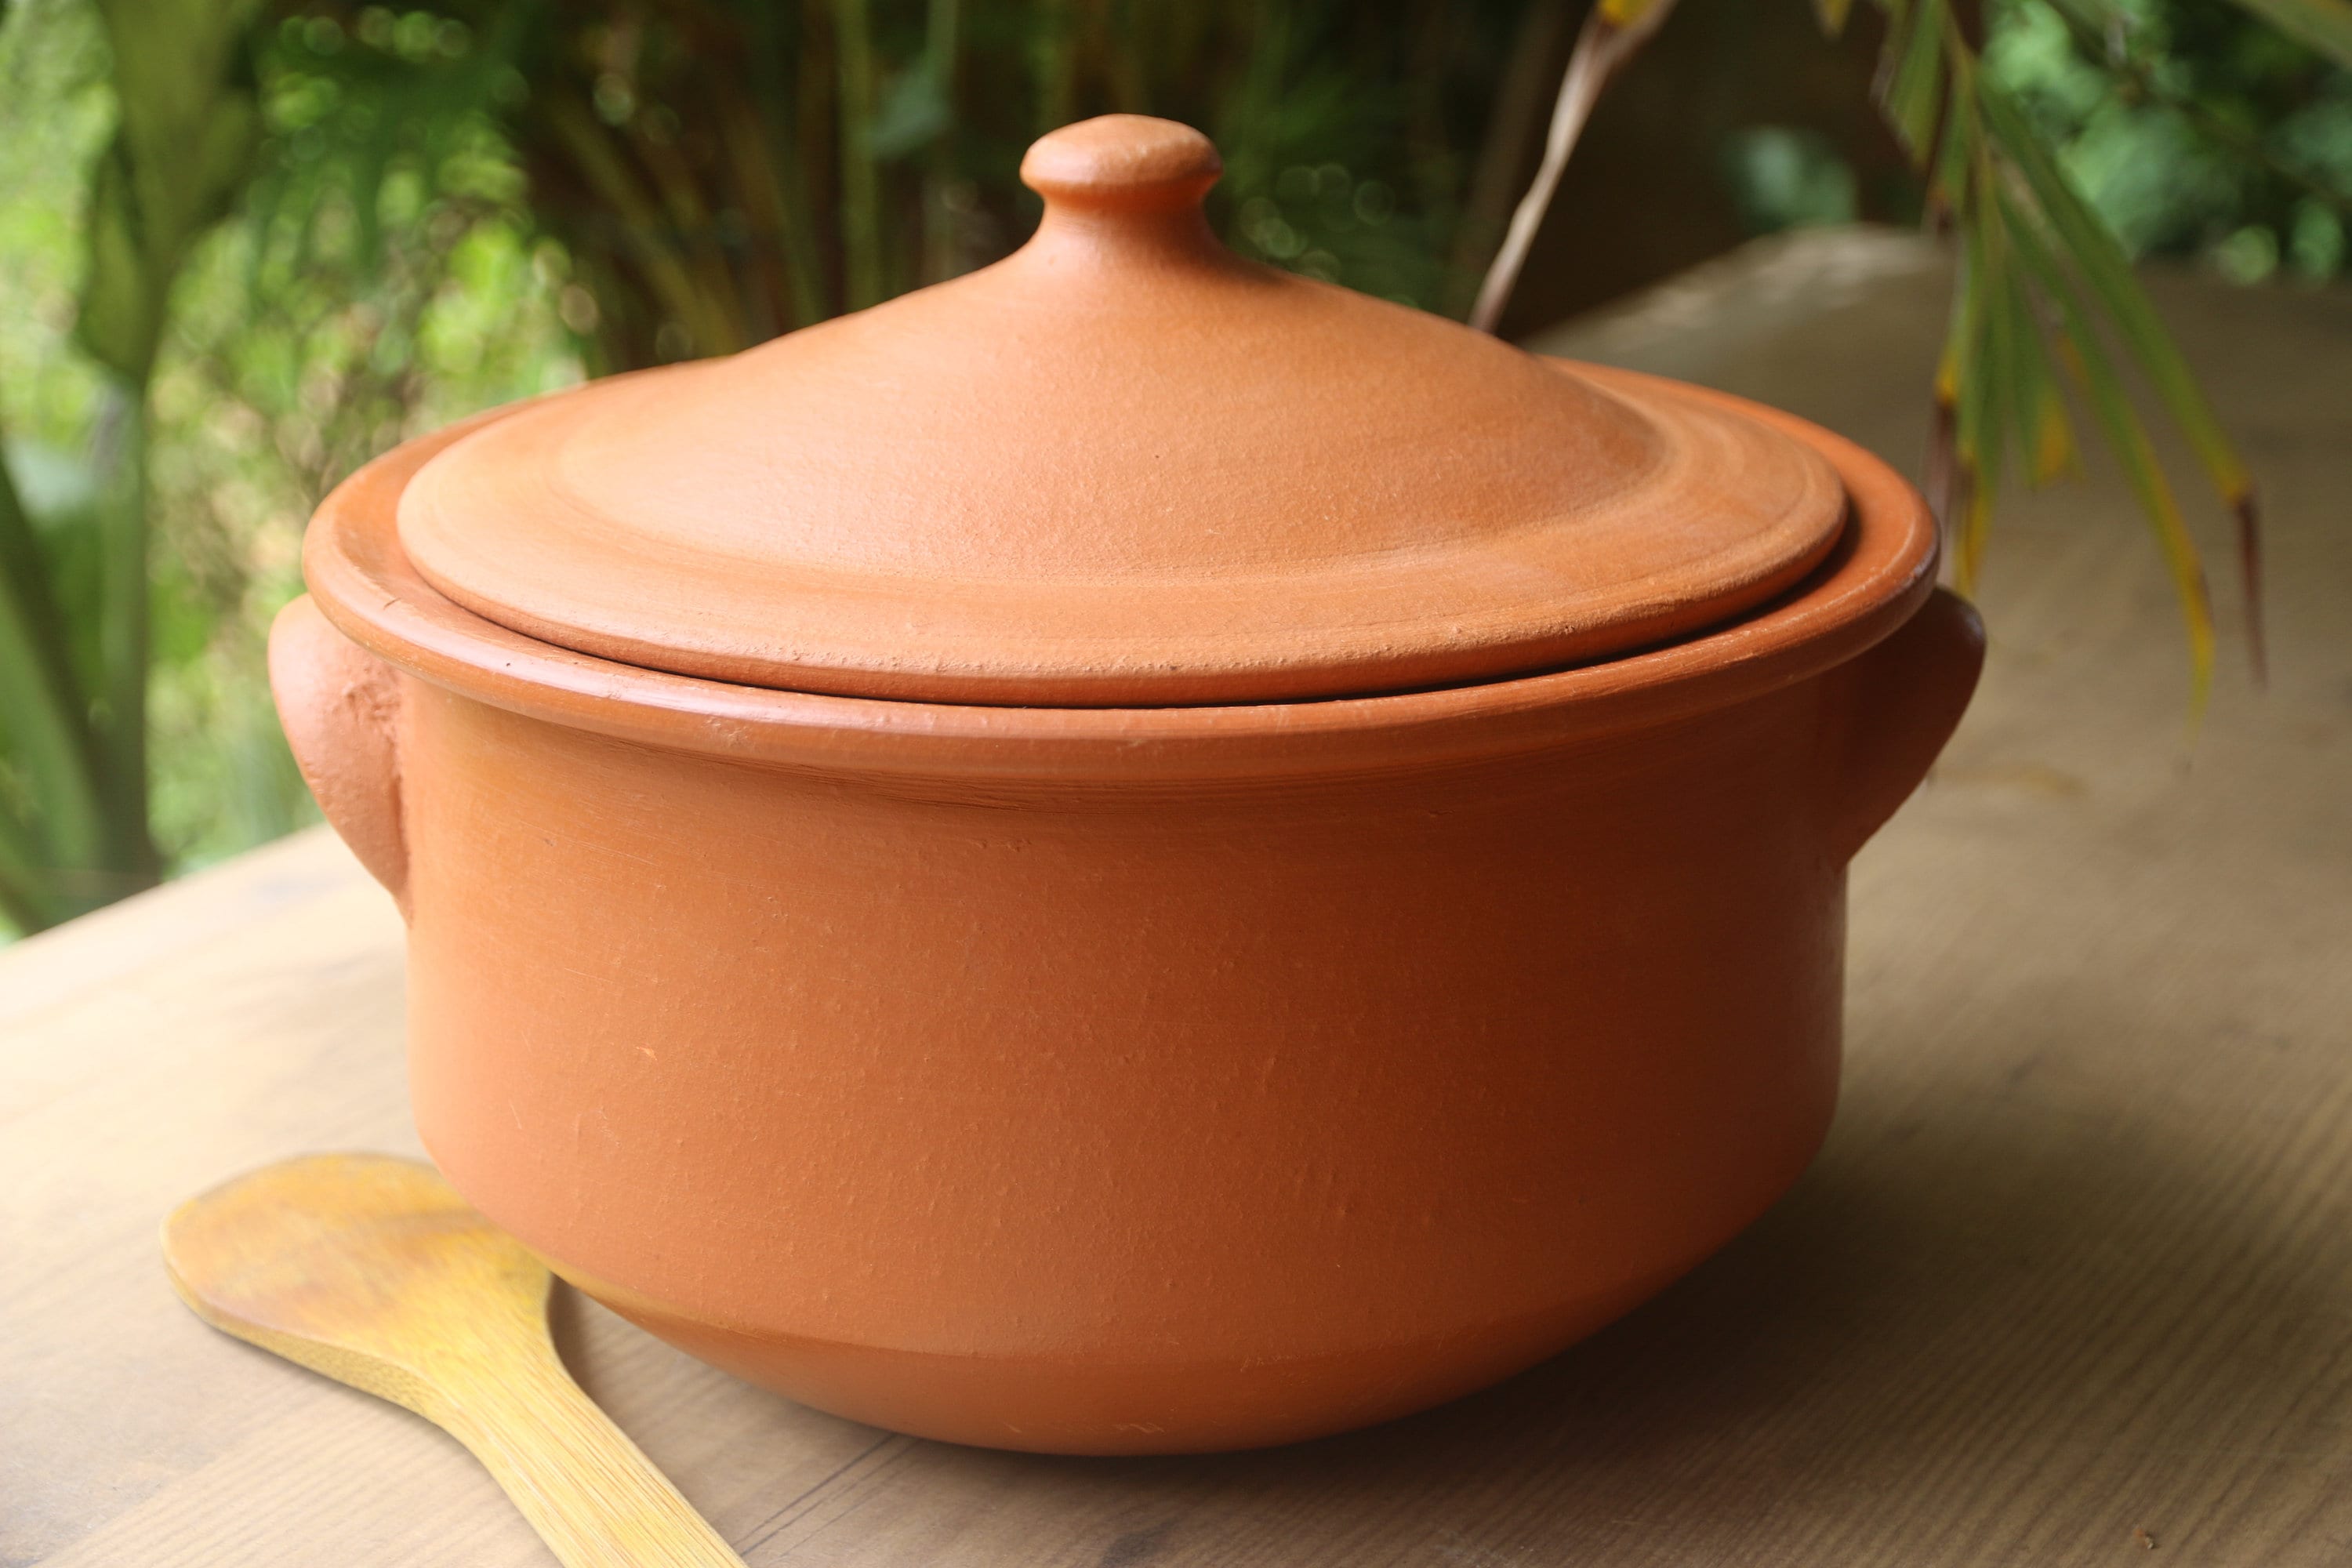 Vintage Cooking Pot Ceramic Pot With Lid Clay Cooking Pot Vintage Kitchen  Pottery Orange Pottery 0,5 L / 16,9-ounce Capacity 